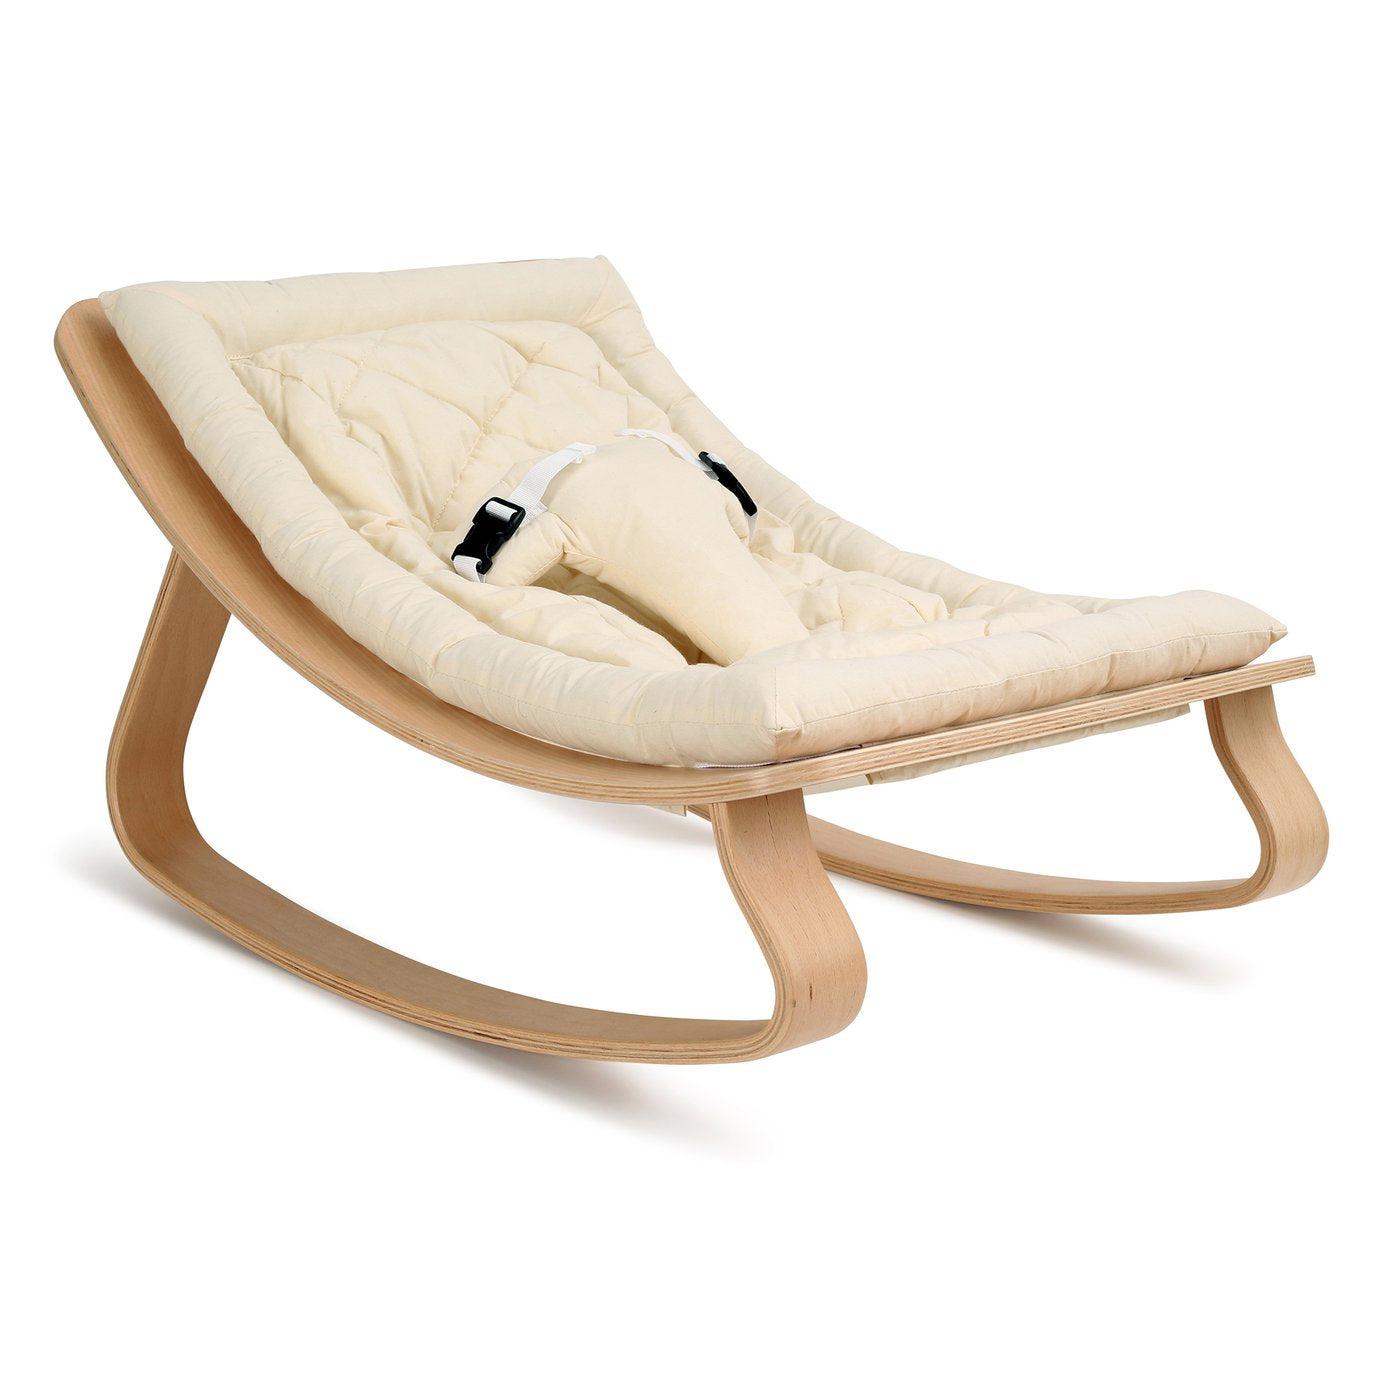 A wooden Levo baby rocker by Charlie Crane with a white background.